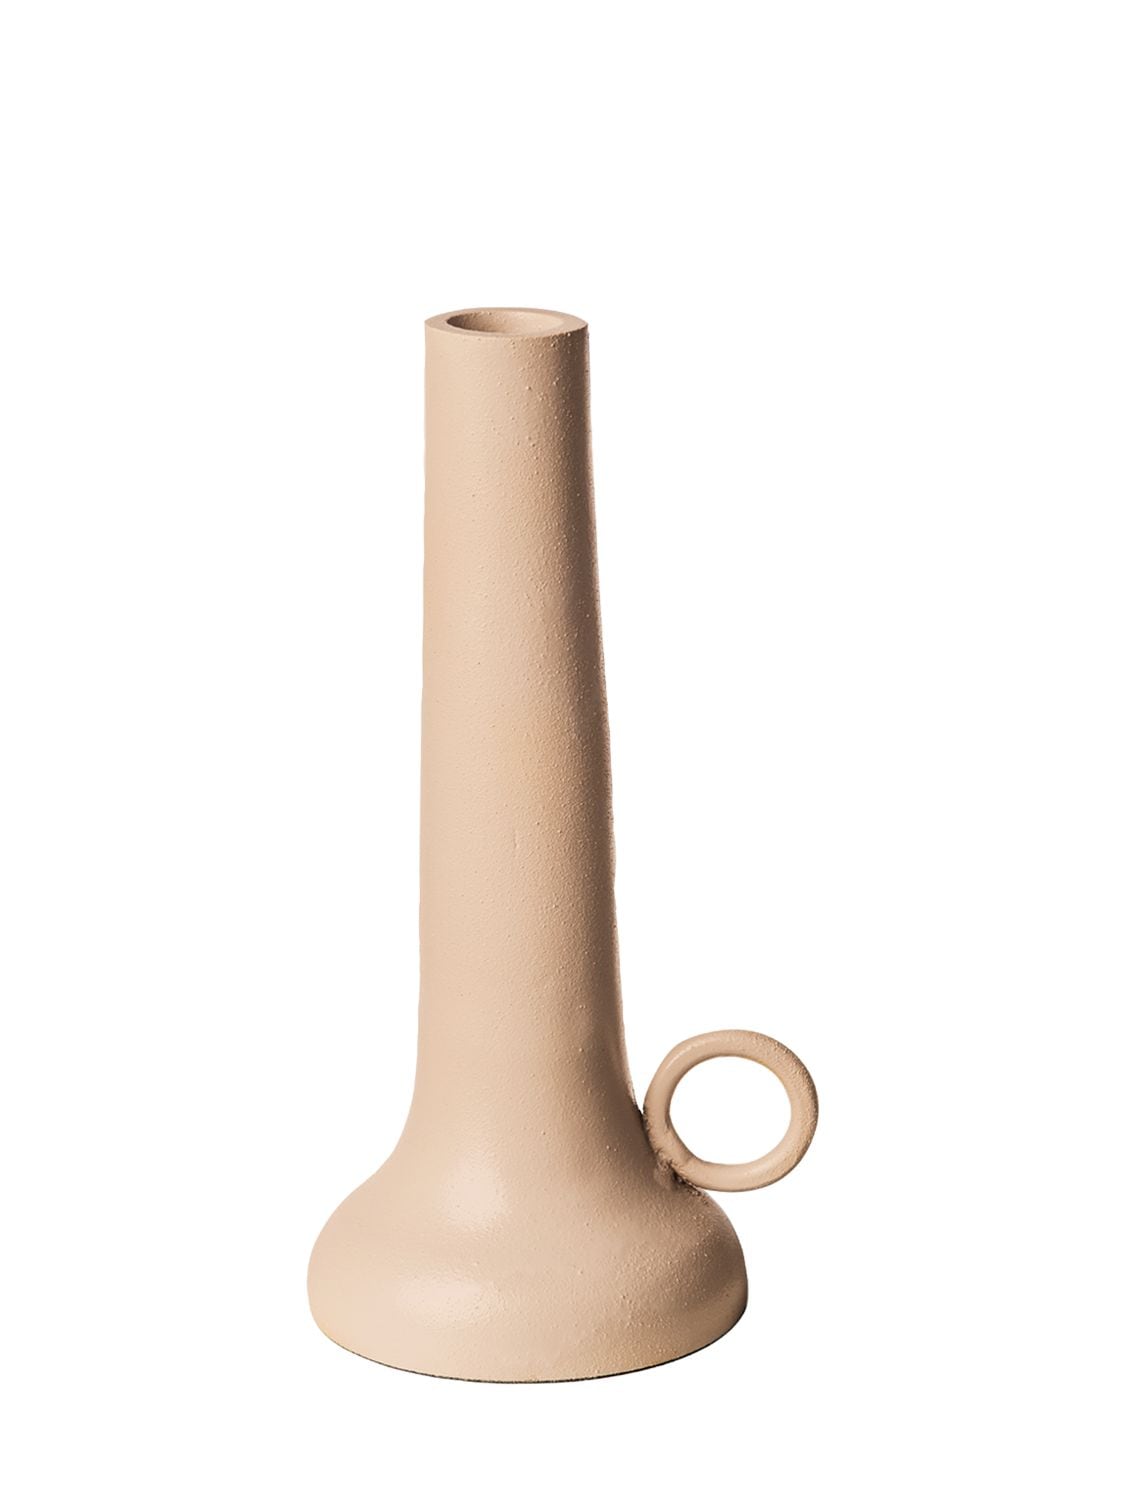 Pols Potten Spartan Small Beige Candle Holder